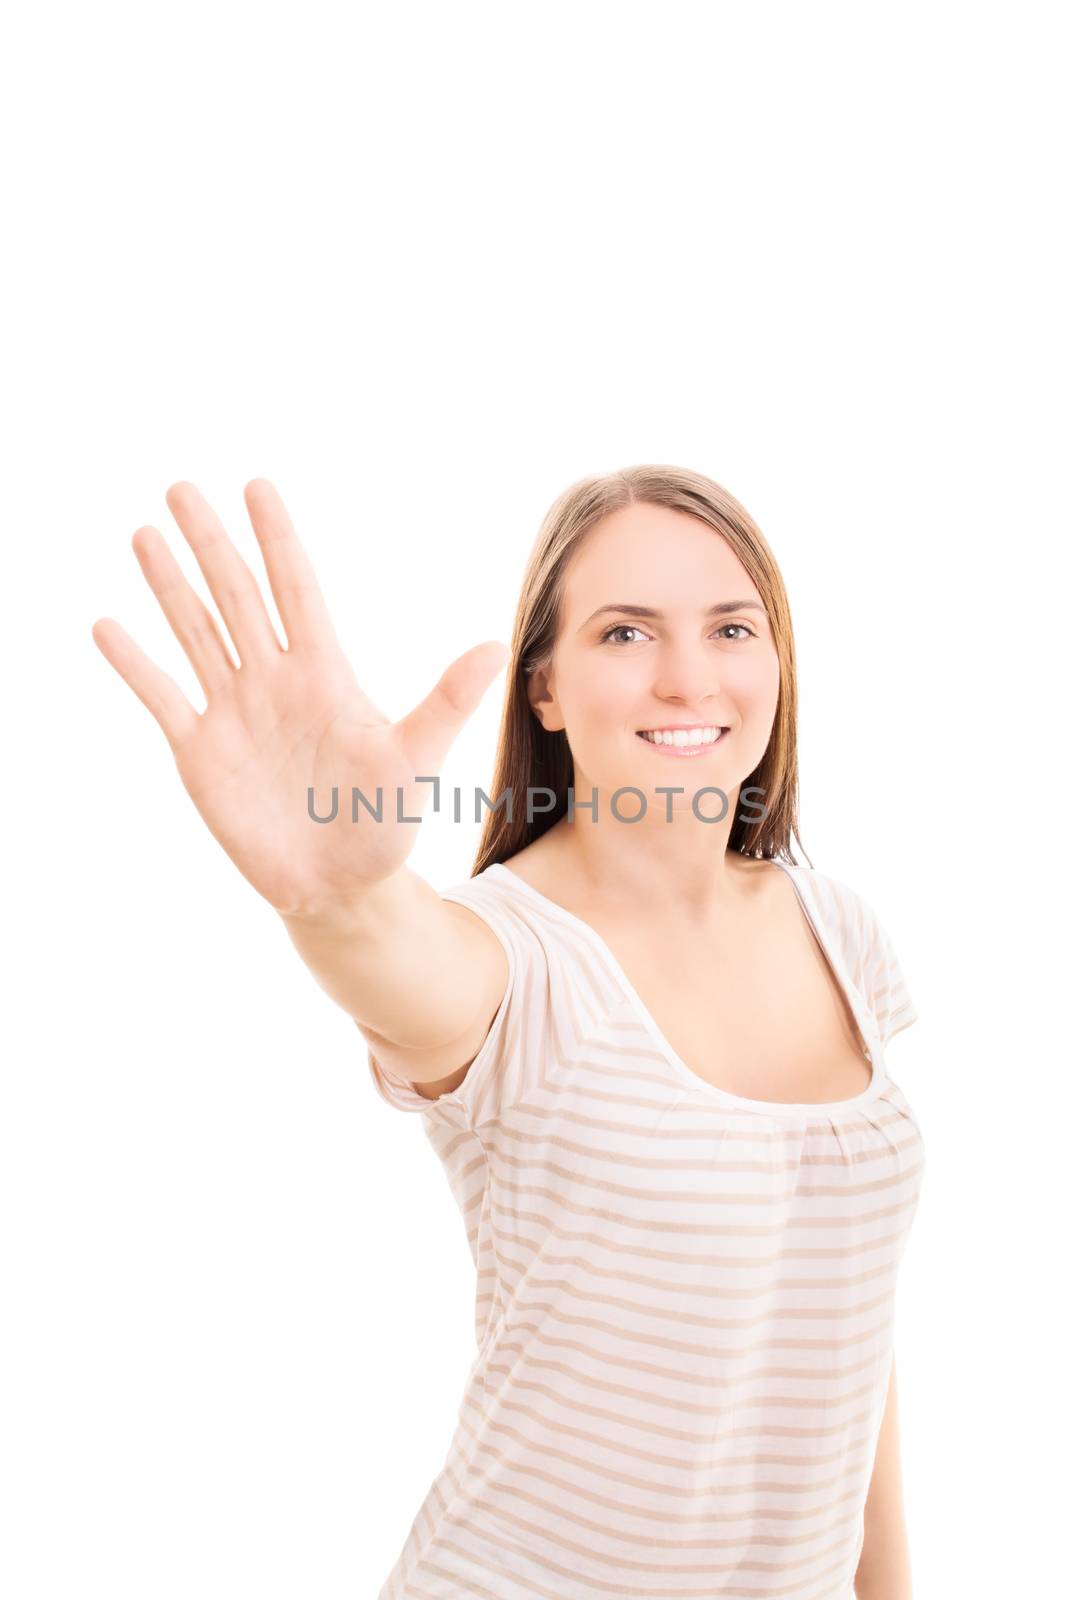 Beautiful smiling young girl holding her hand up making a high five gesture, isolated on white background.